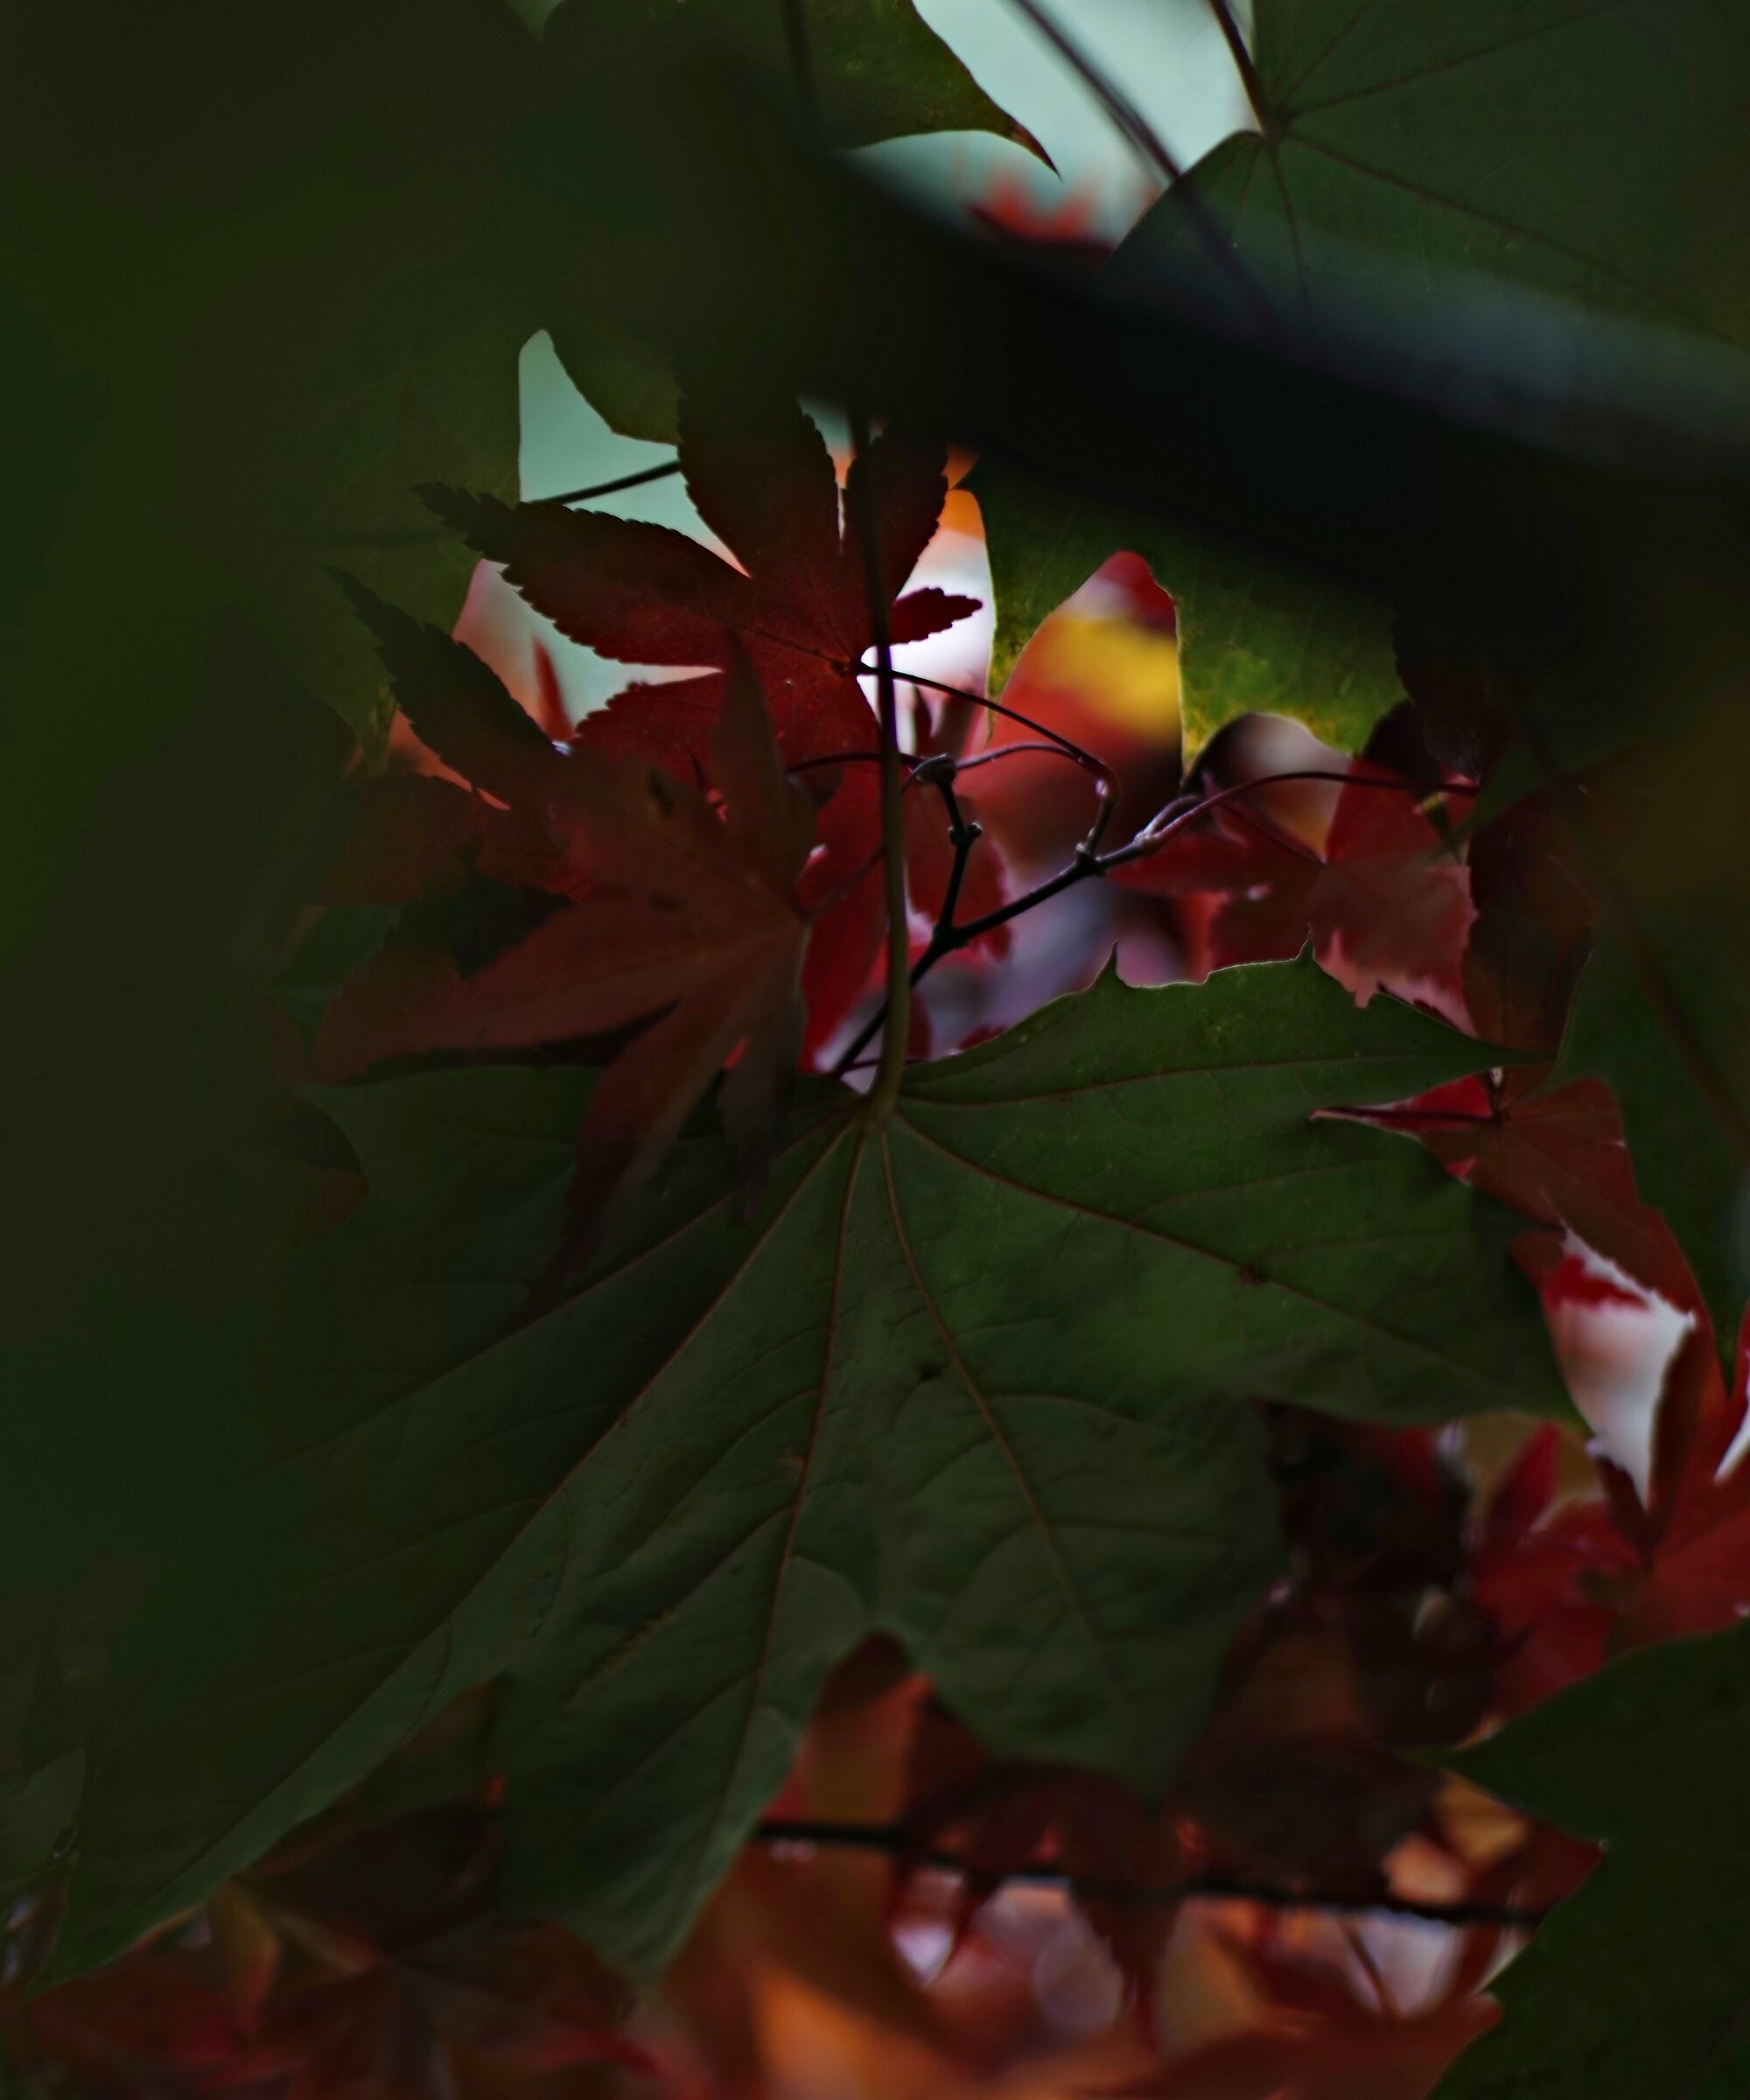 Among the leaves of a maple II...